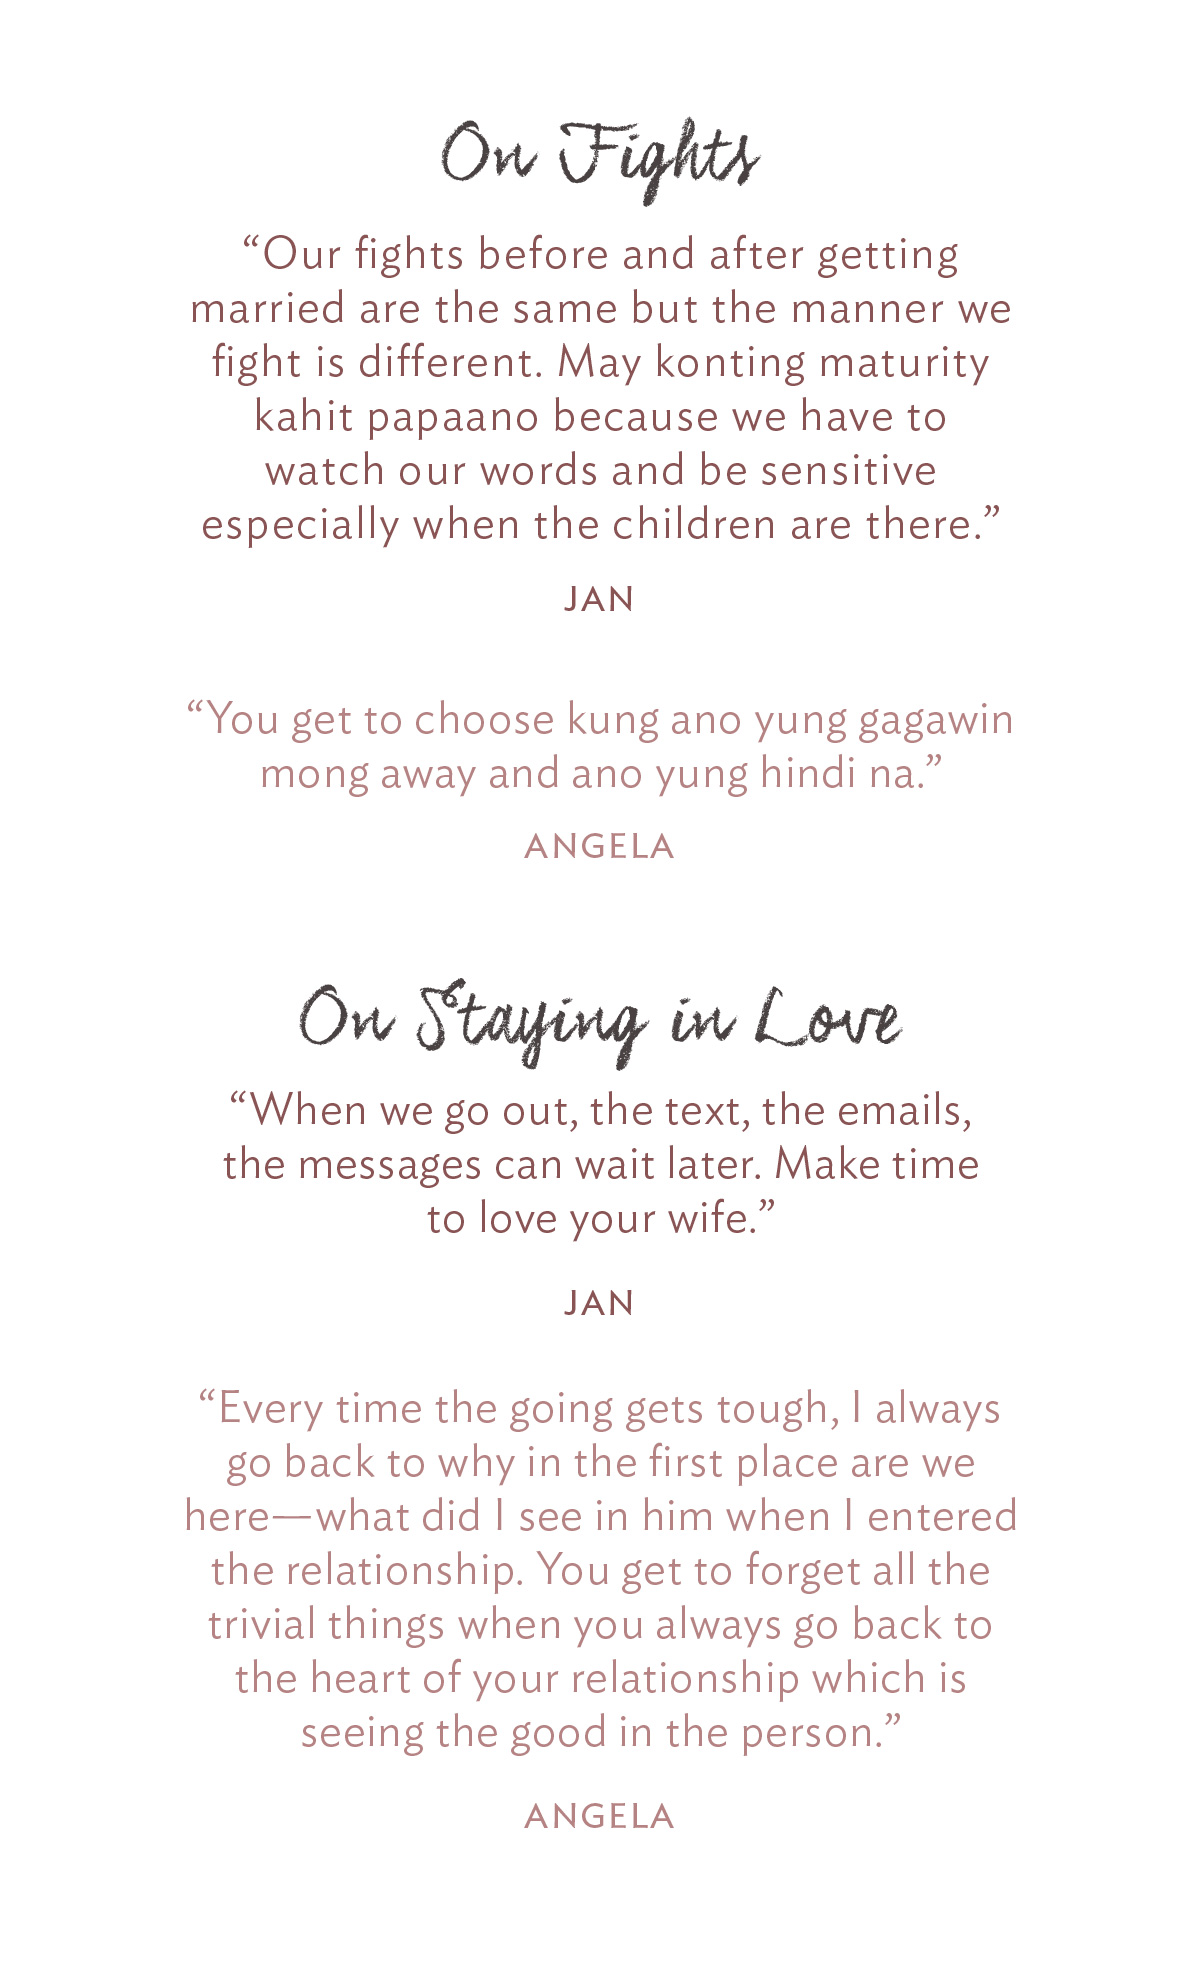 On Fights “Our fights before and after getting married are the same but the manner we fight is different. May konting maturity kahit papaano because we have to watch our words and be sensitive especially when the children are there.” Jan “You get to choose kung ano yung gagawin mong away and ano yung hindi na.” -Angela On Staying in Love: “When we go out, the text, the emails, the messages can wait later. Make time to love your wife.” -Jan “Every time the going gets tough, I always go back to why in the first place are we here—what did I see in him when I entered the relationship. You get to forget all the trivial things when you always go back to the heart of your relationship which is seeing the good in the person.” -Angela